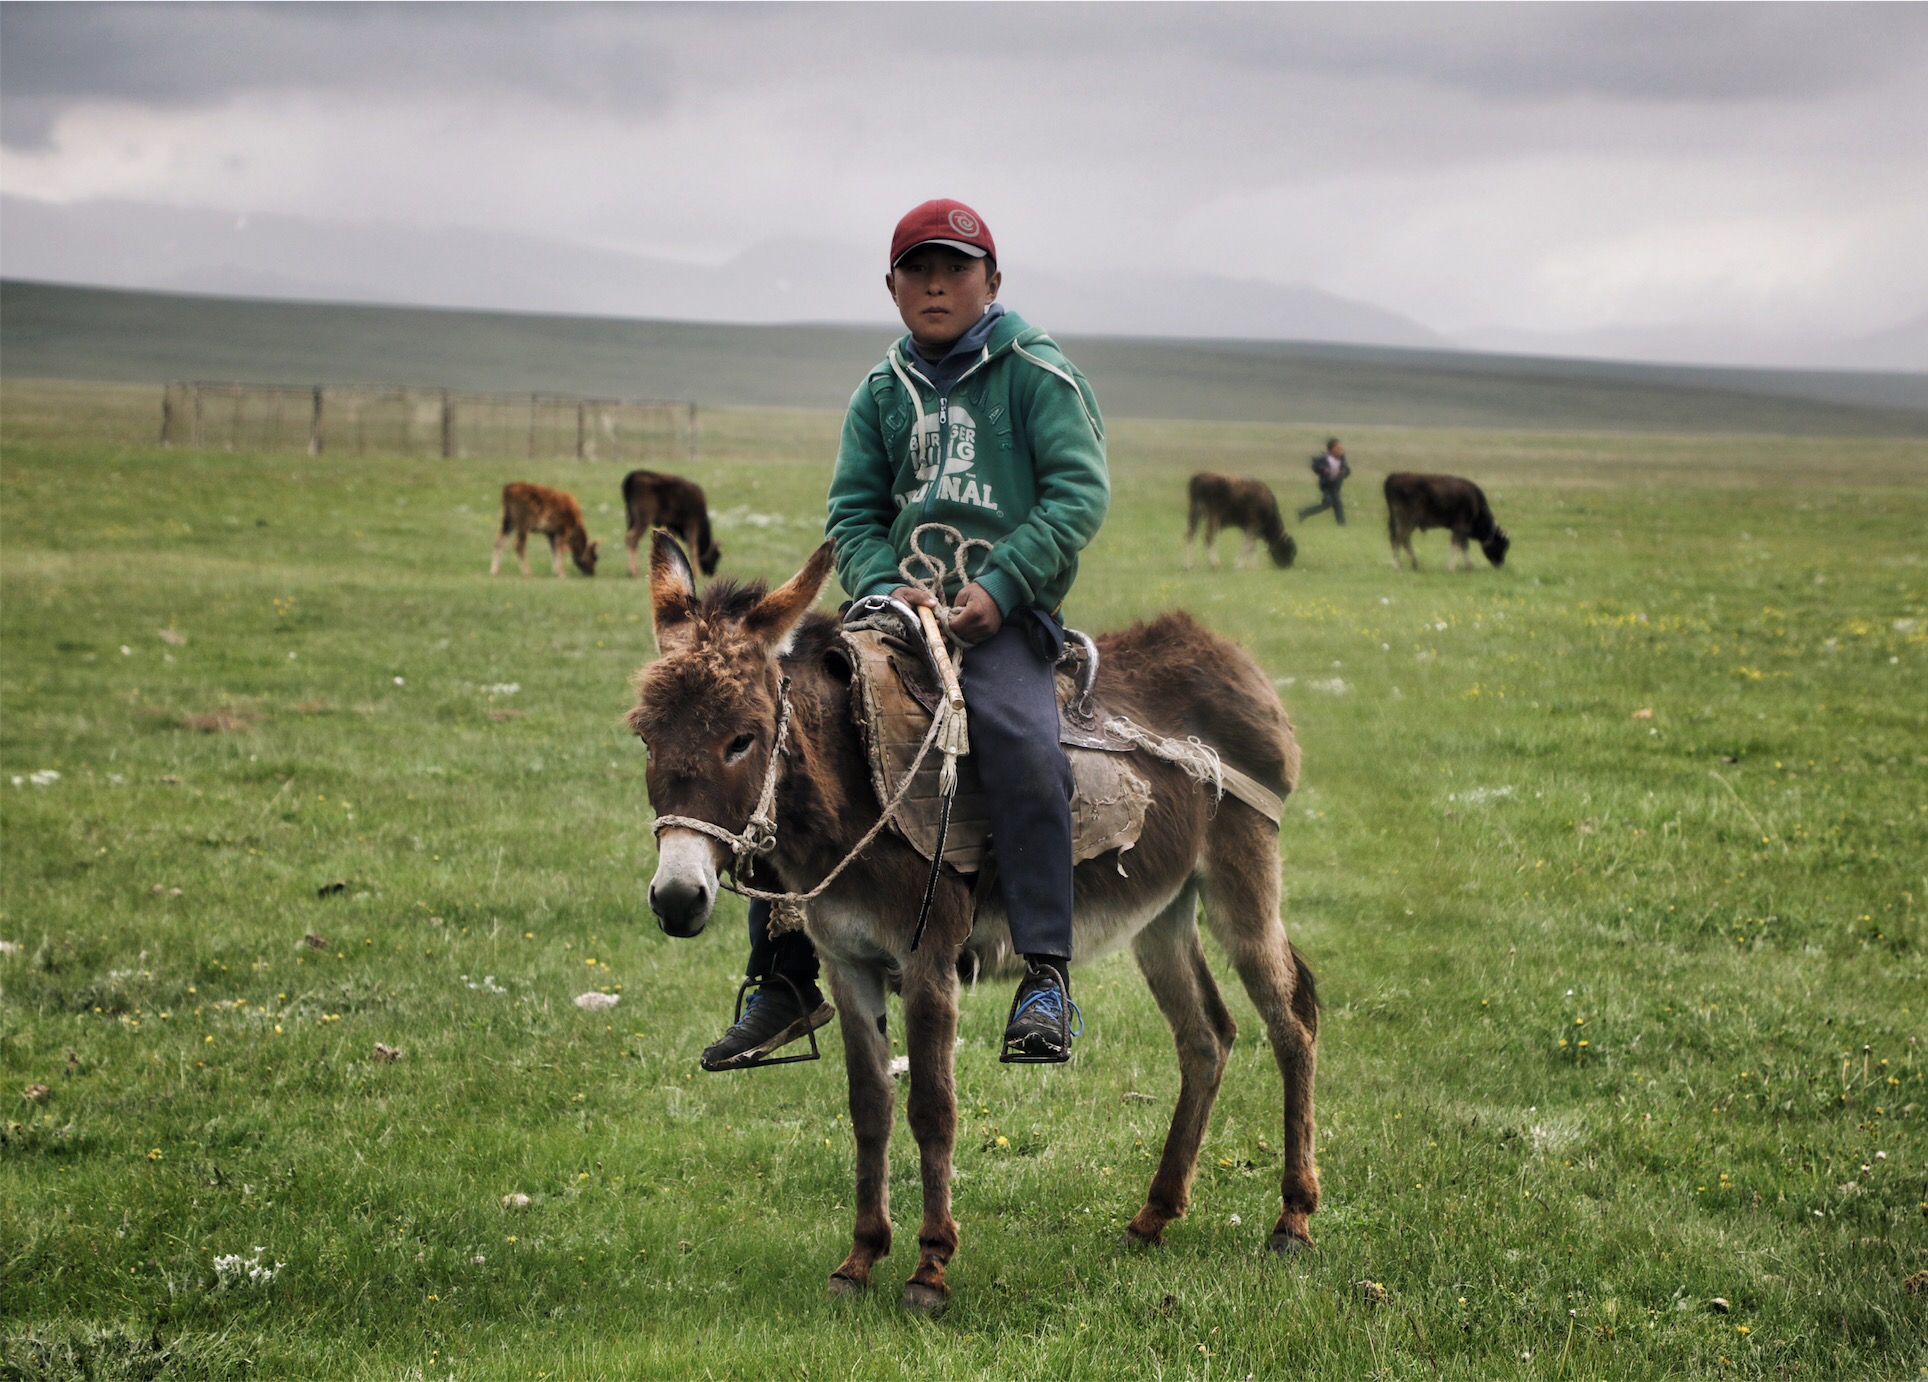 Boy and his donkey - Kyrgyzstan.